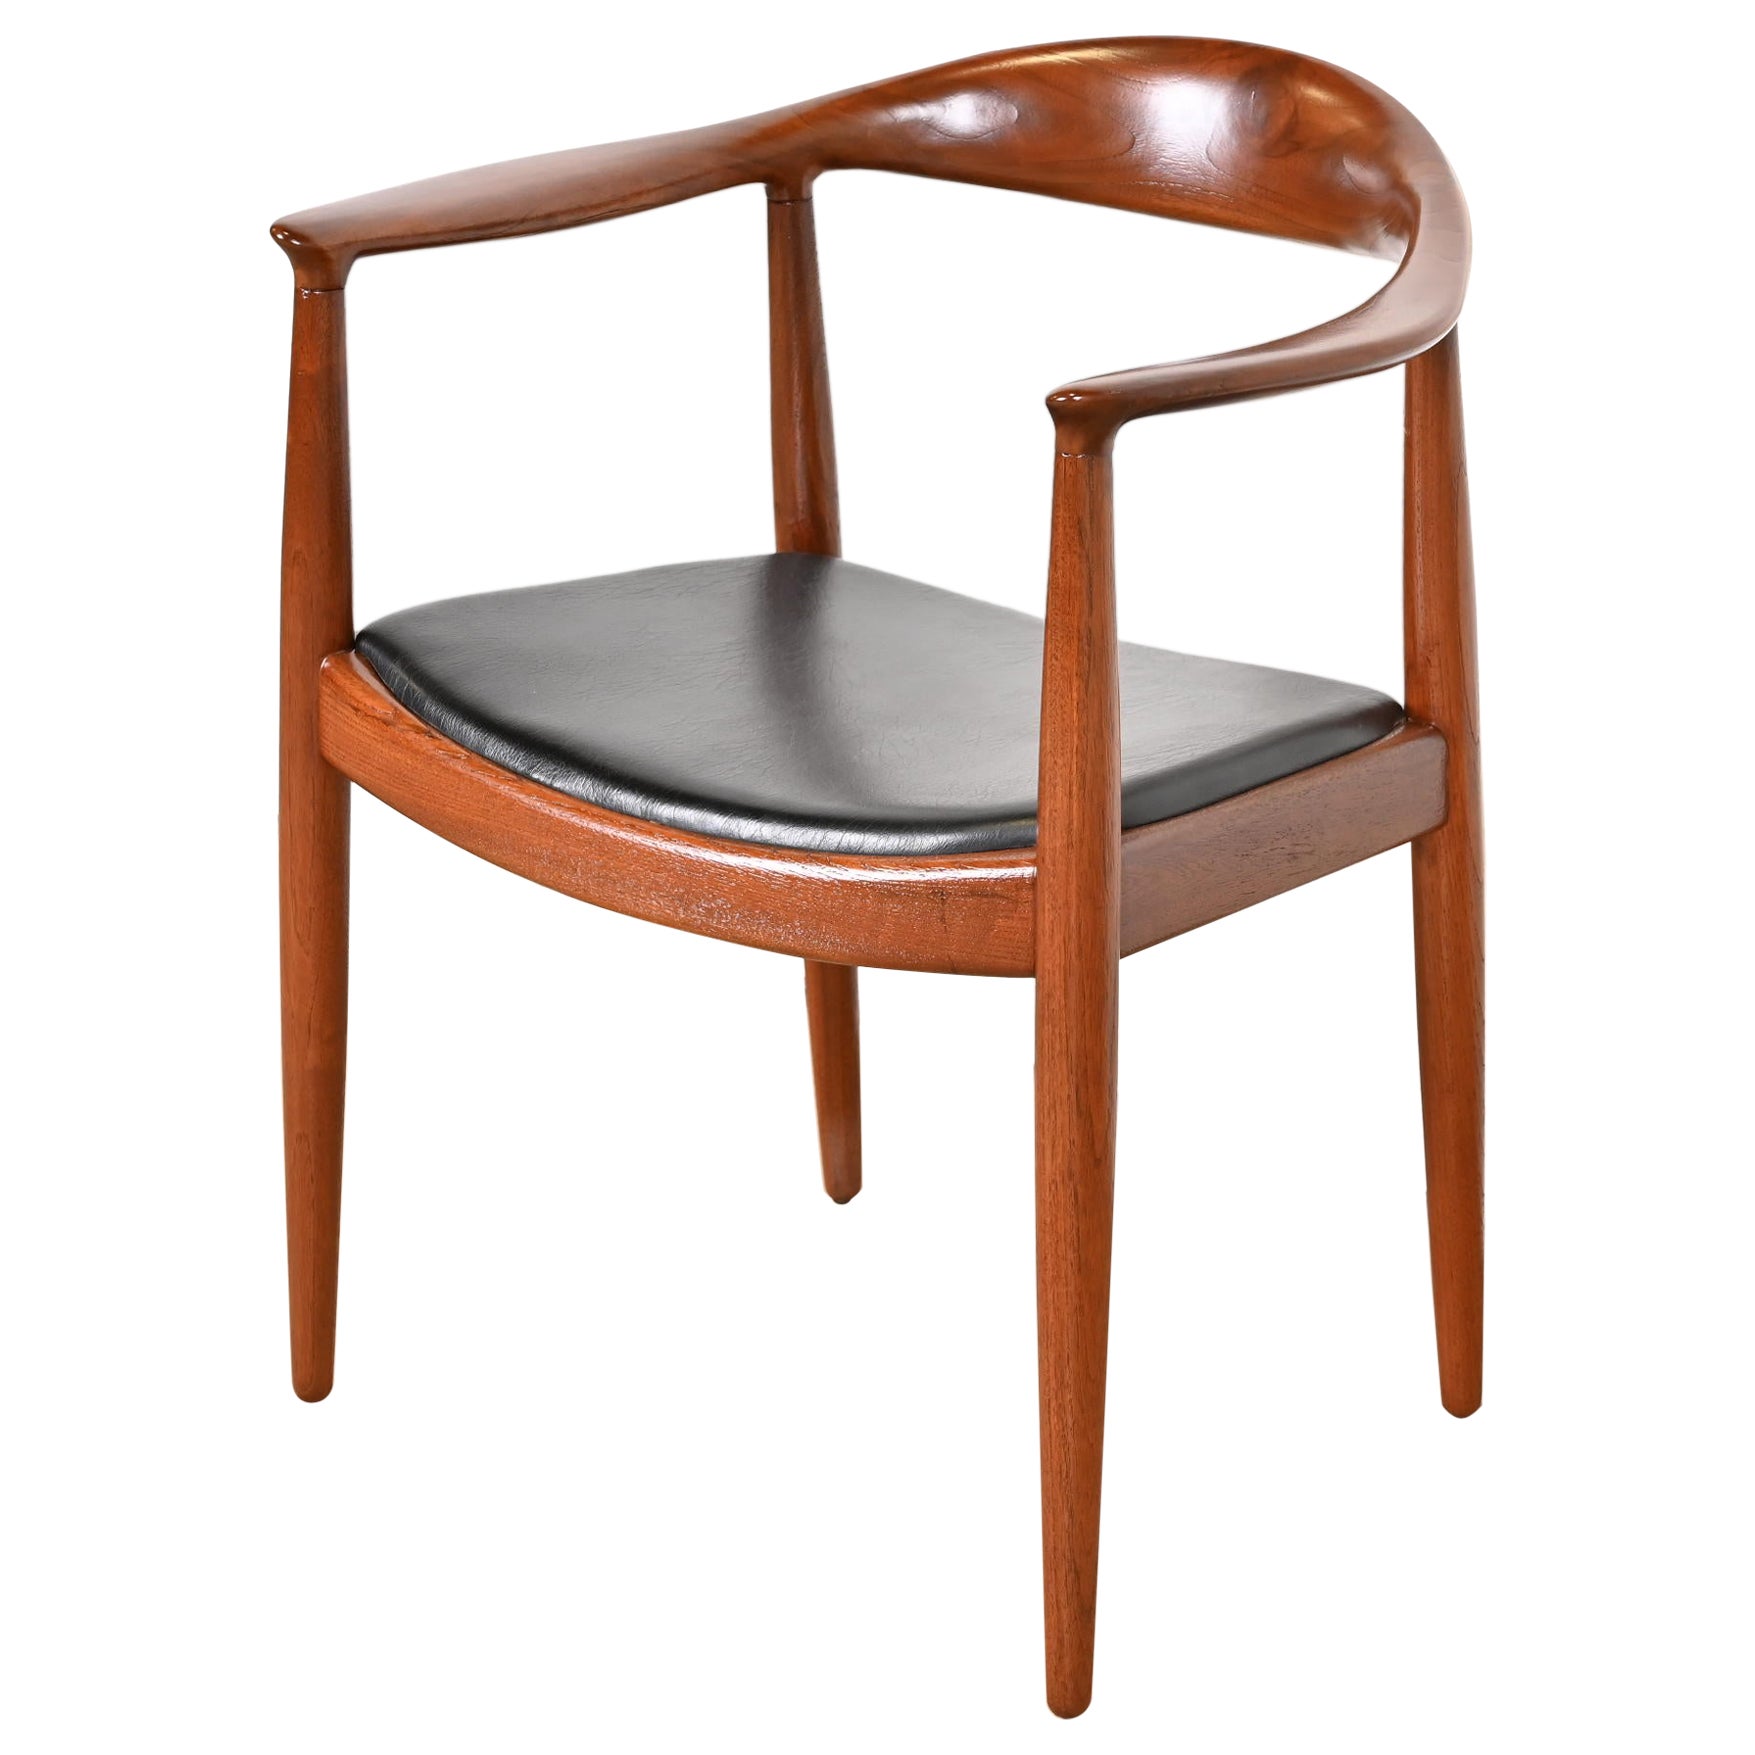 Hans Wegner for Johannes Hansen "The Chair" Teak and Leather Round Chair, 1960s For Sale